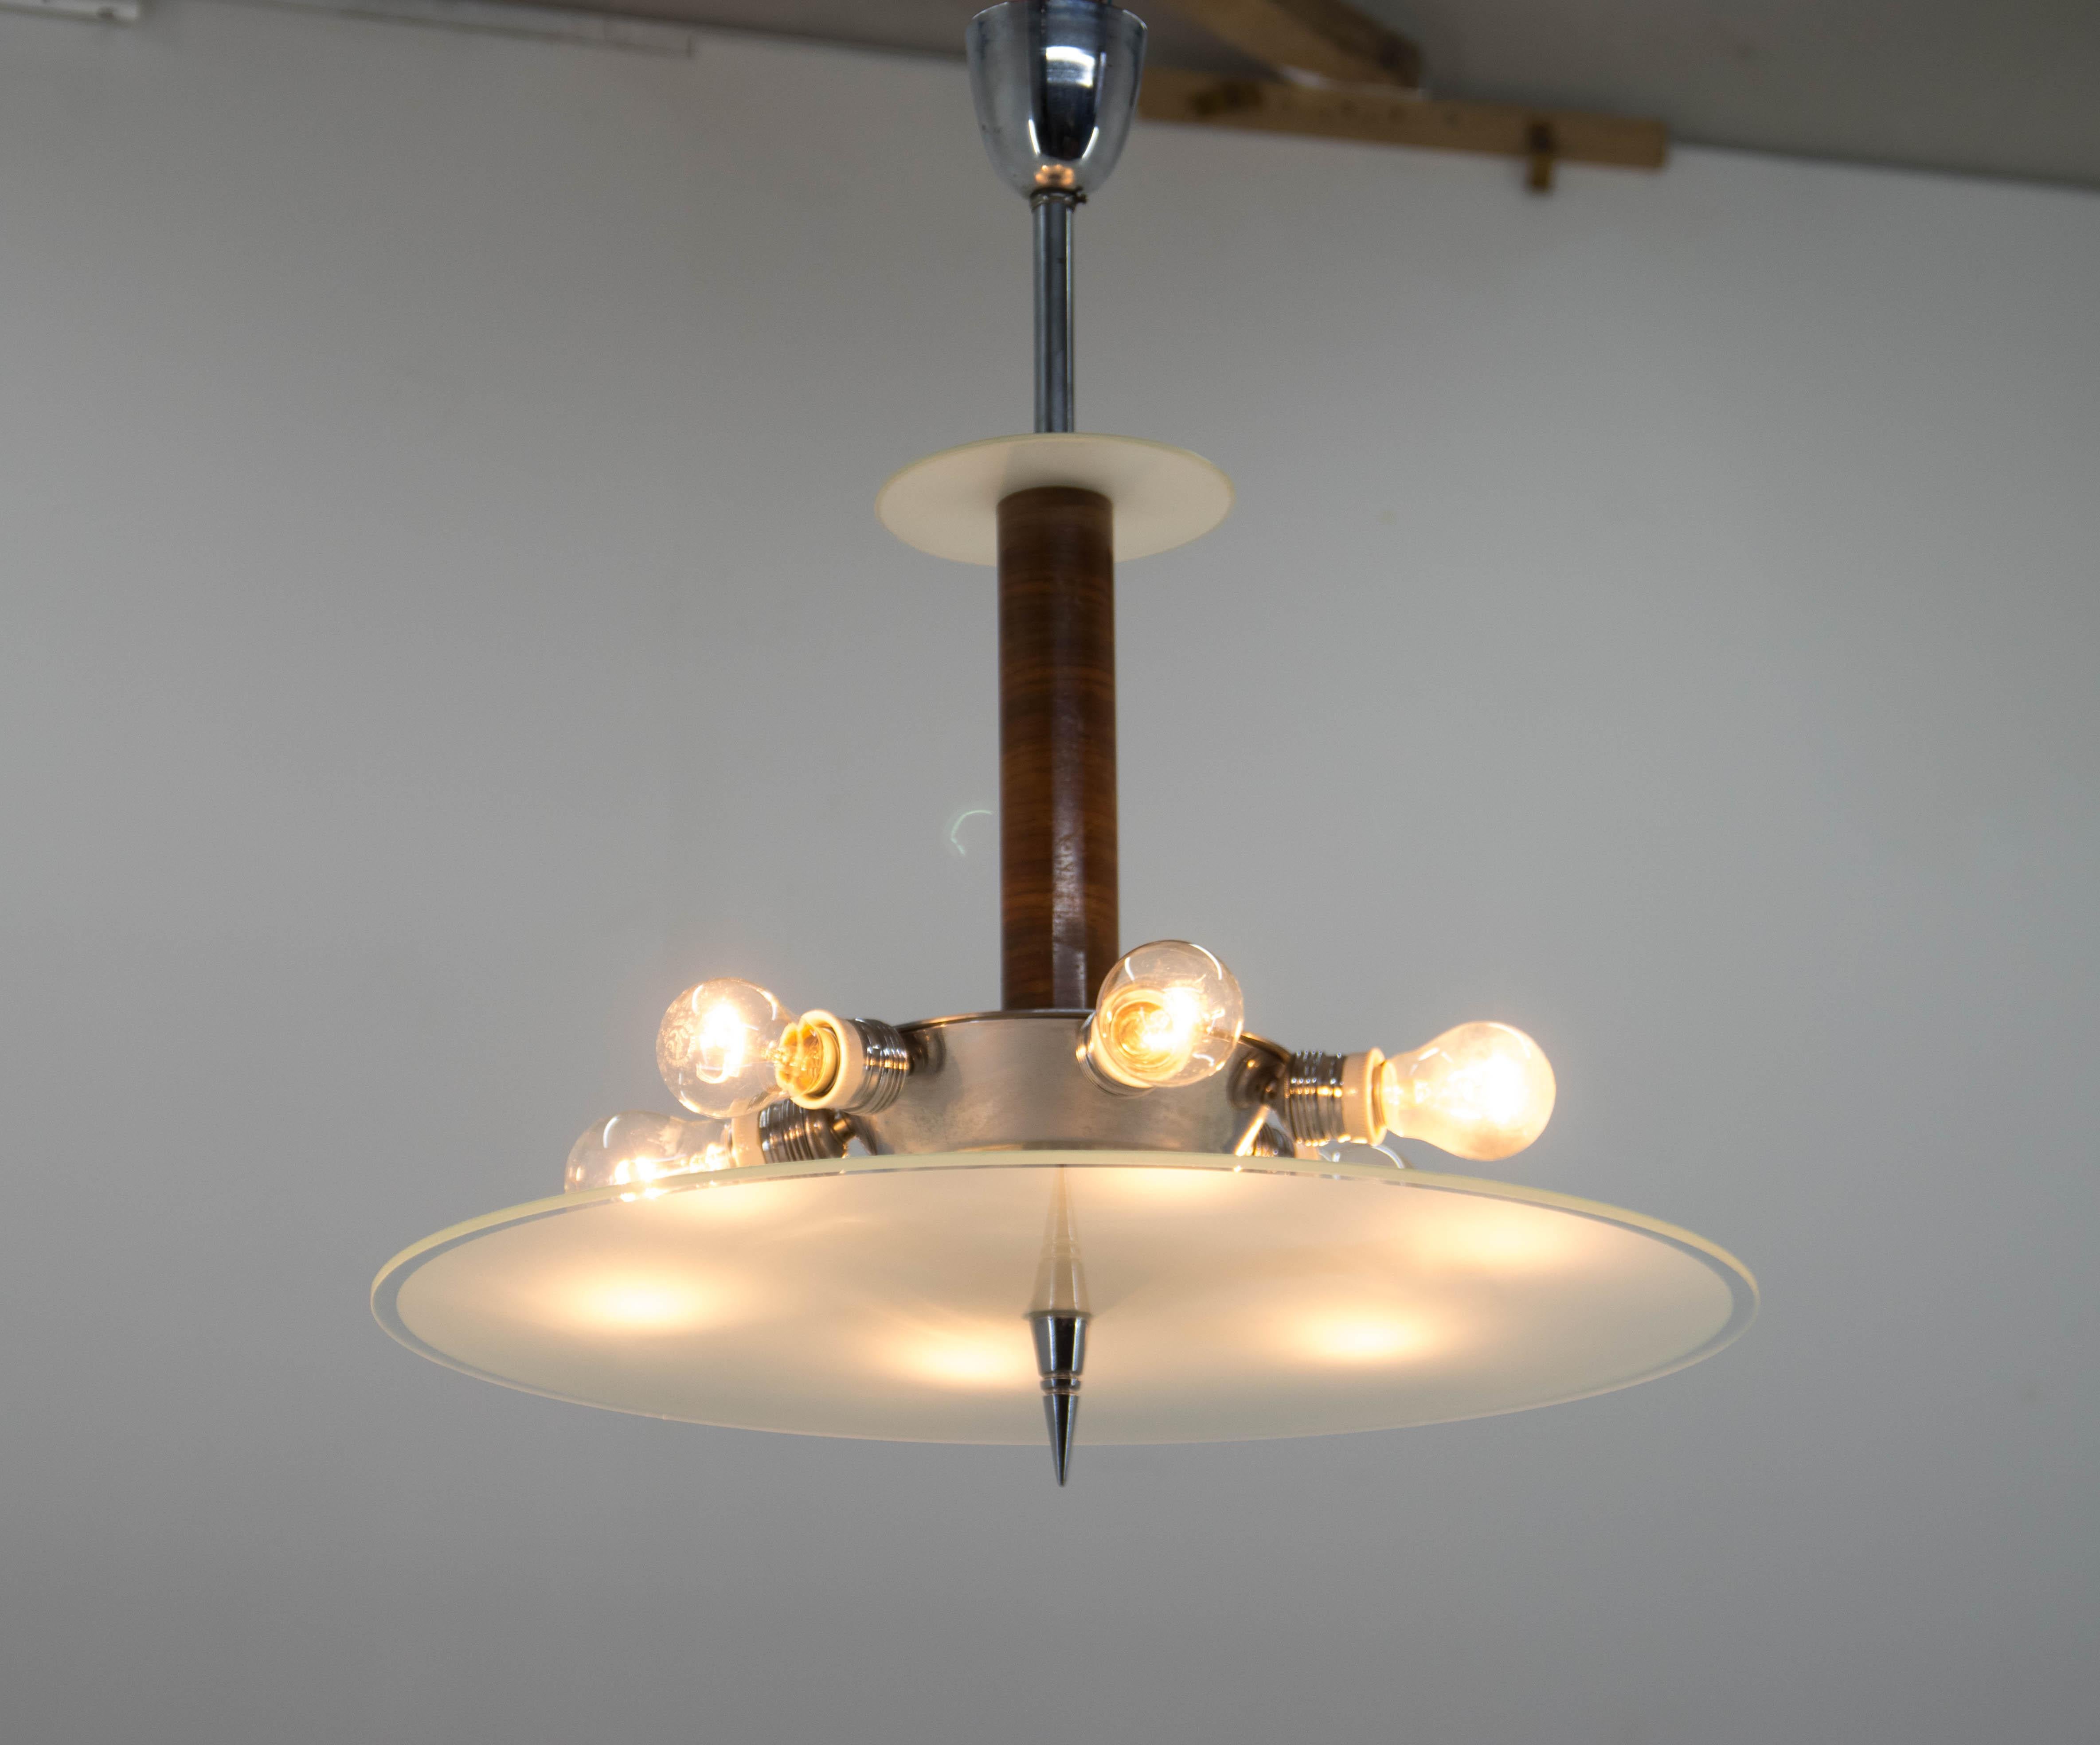 Unusual Art Deco or Functionalist chandelier made of walnut, chrome and glass.
Cleaned, rewired
two separate circuits: 3+3x60W, E25-E27 bulbs
US wiring compatible.